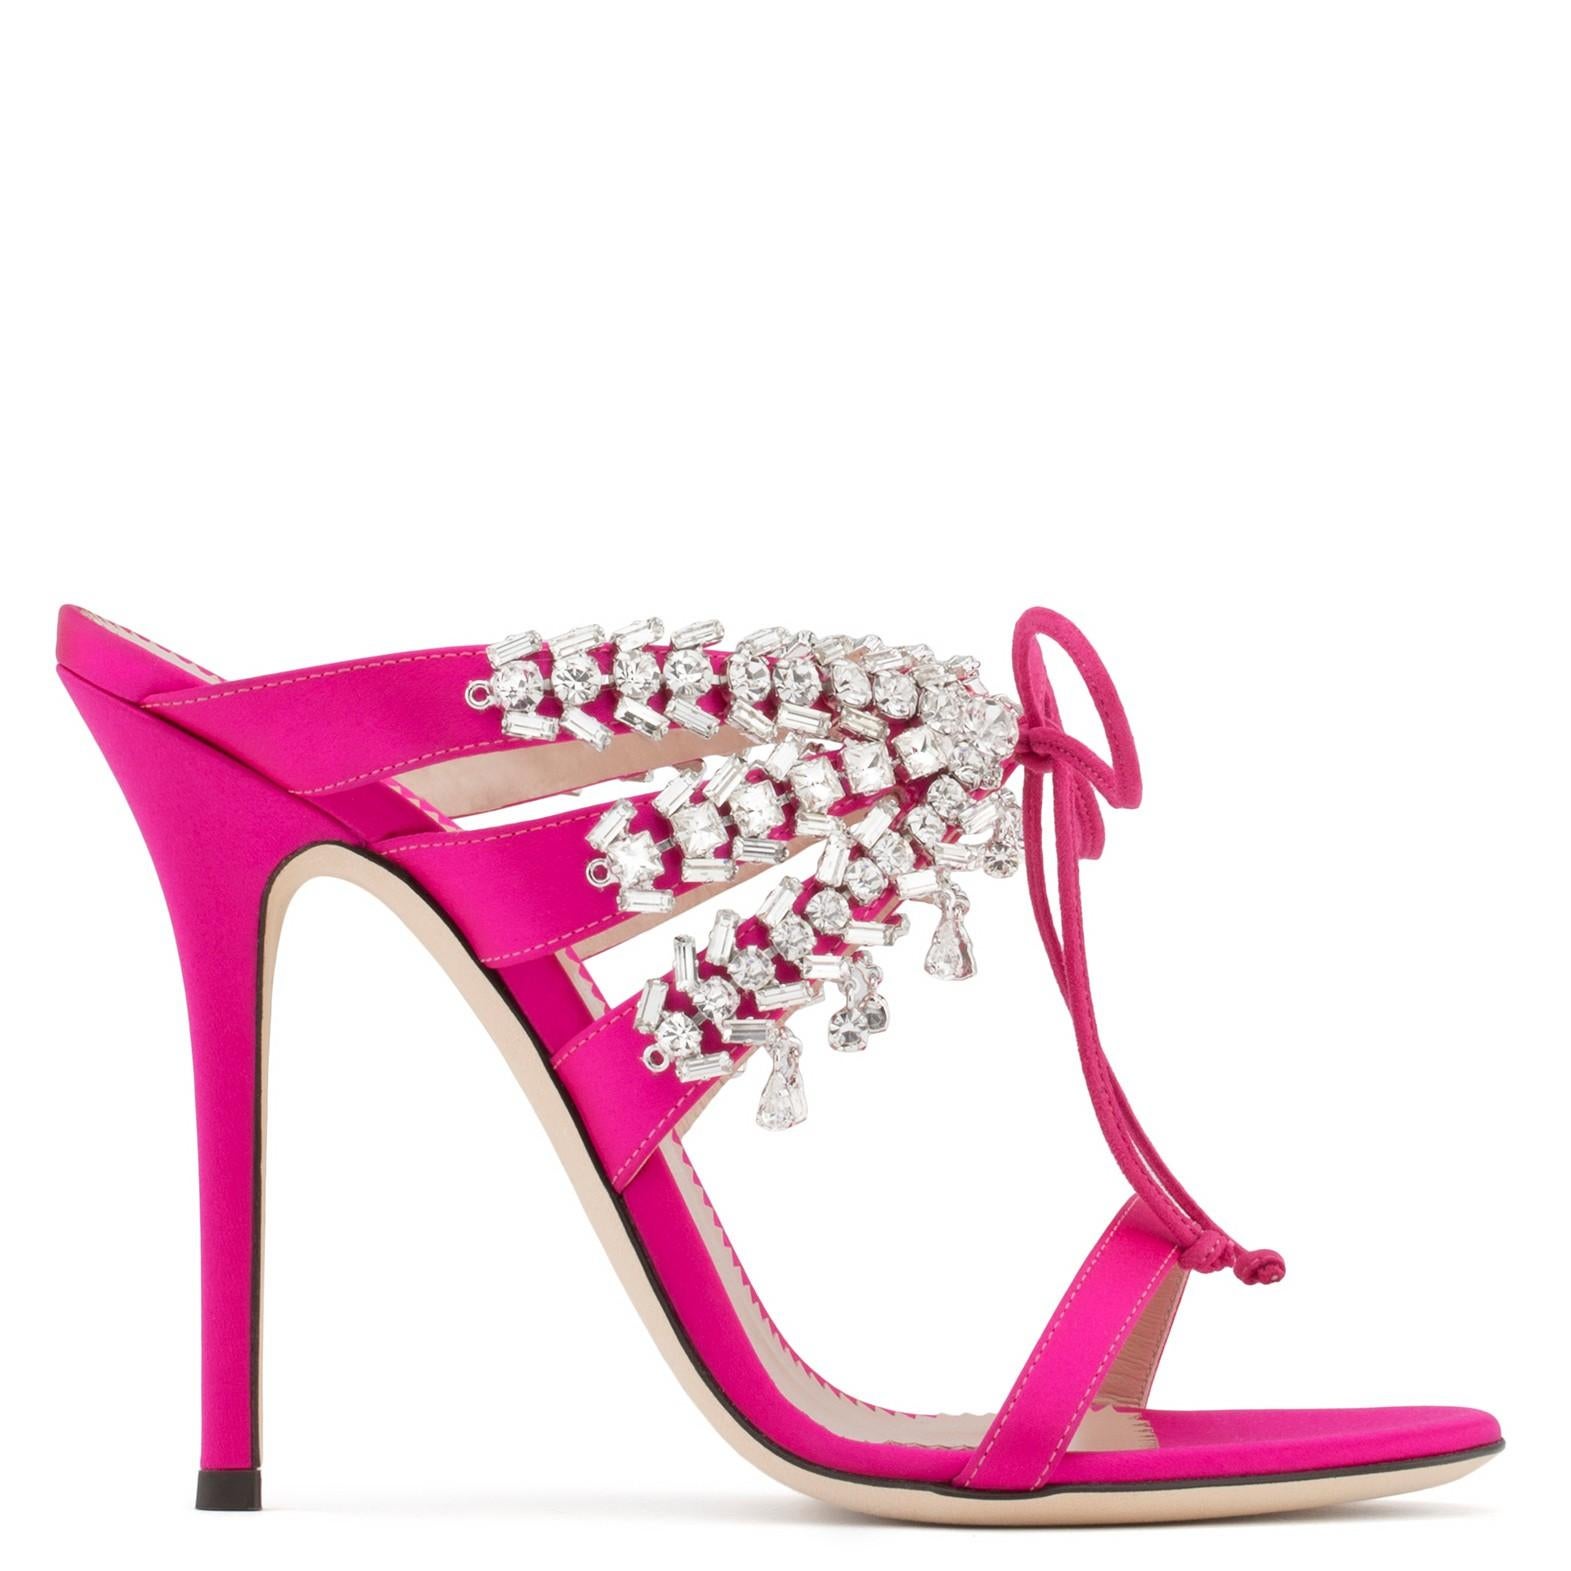 Giuseppe Zanotti NEW Pink Crystal Slide in Mules Sandals Heels in Box ...